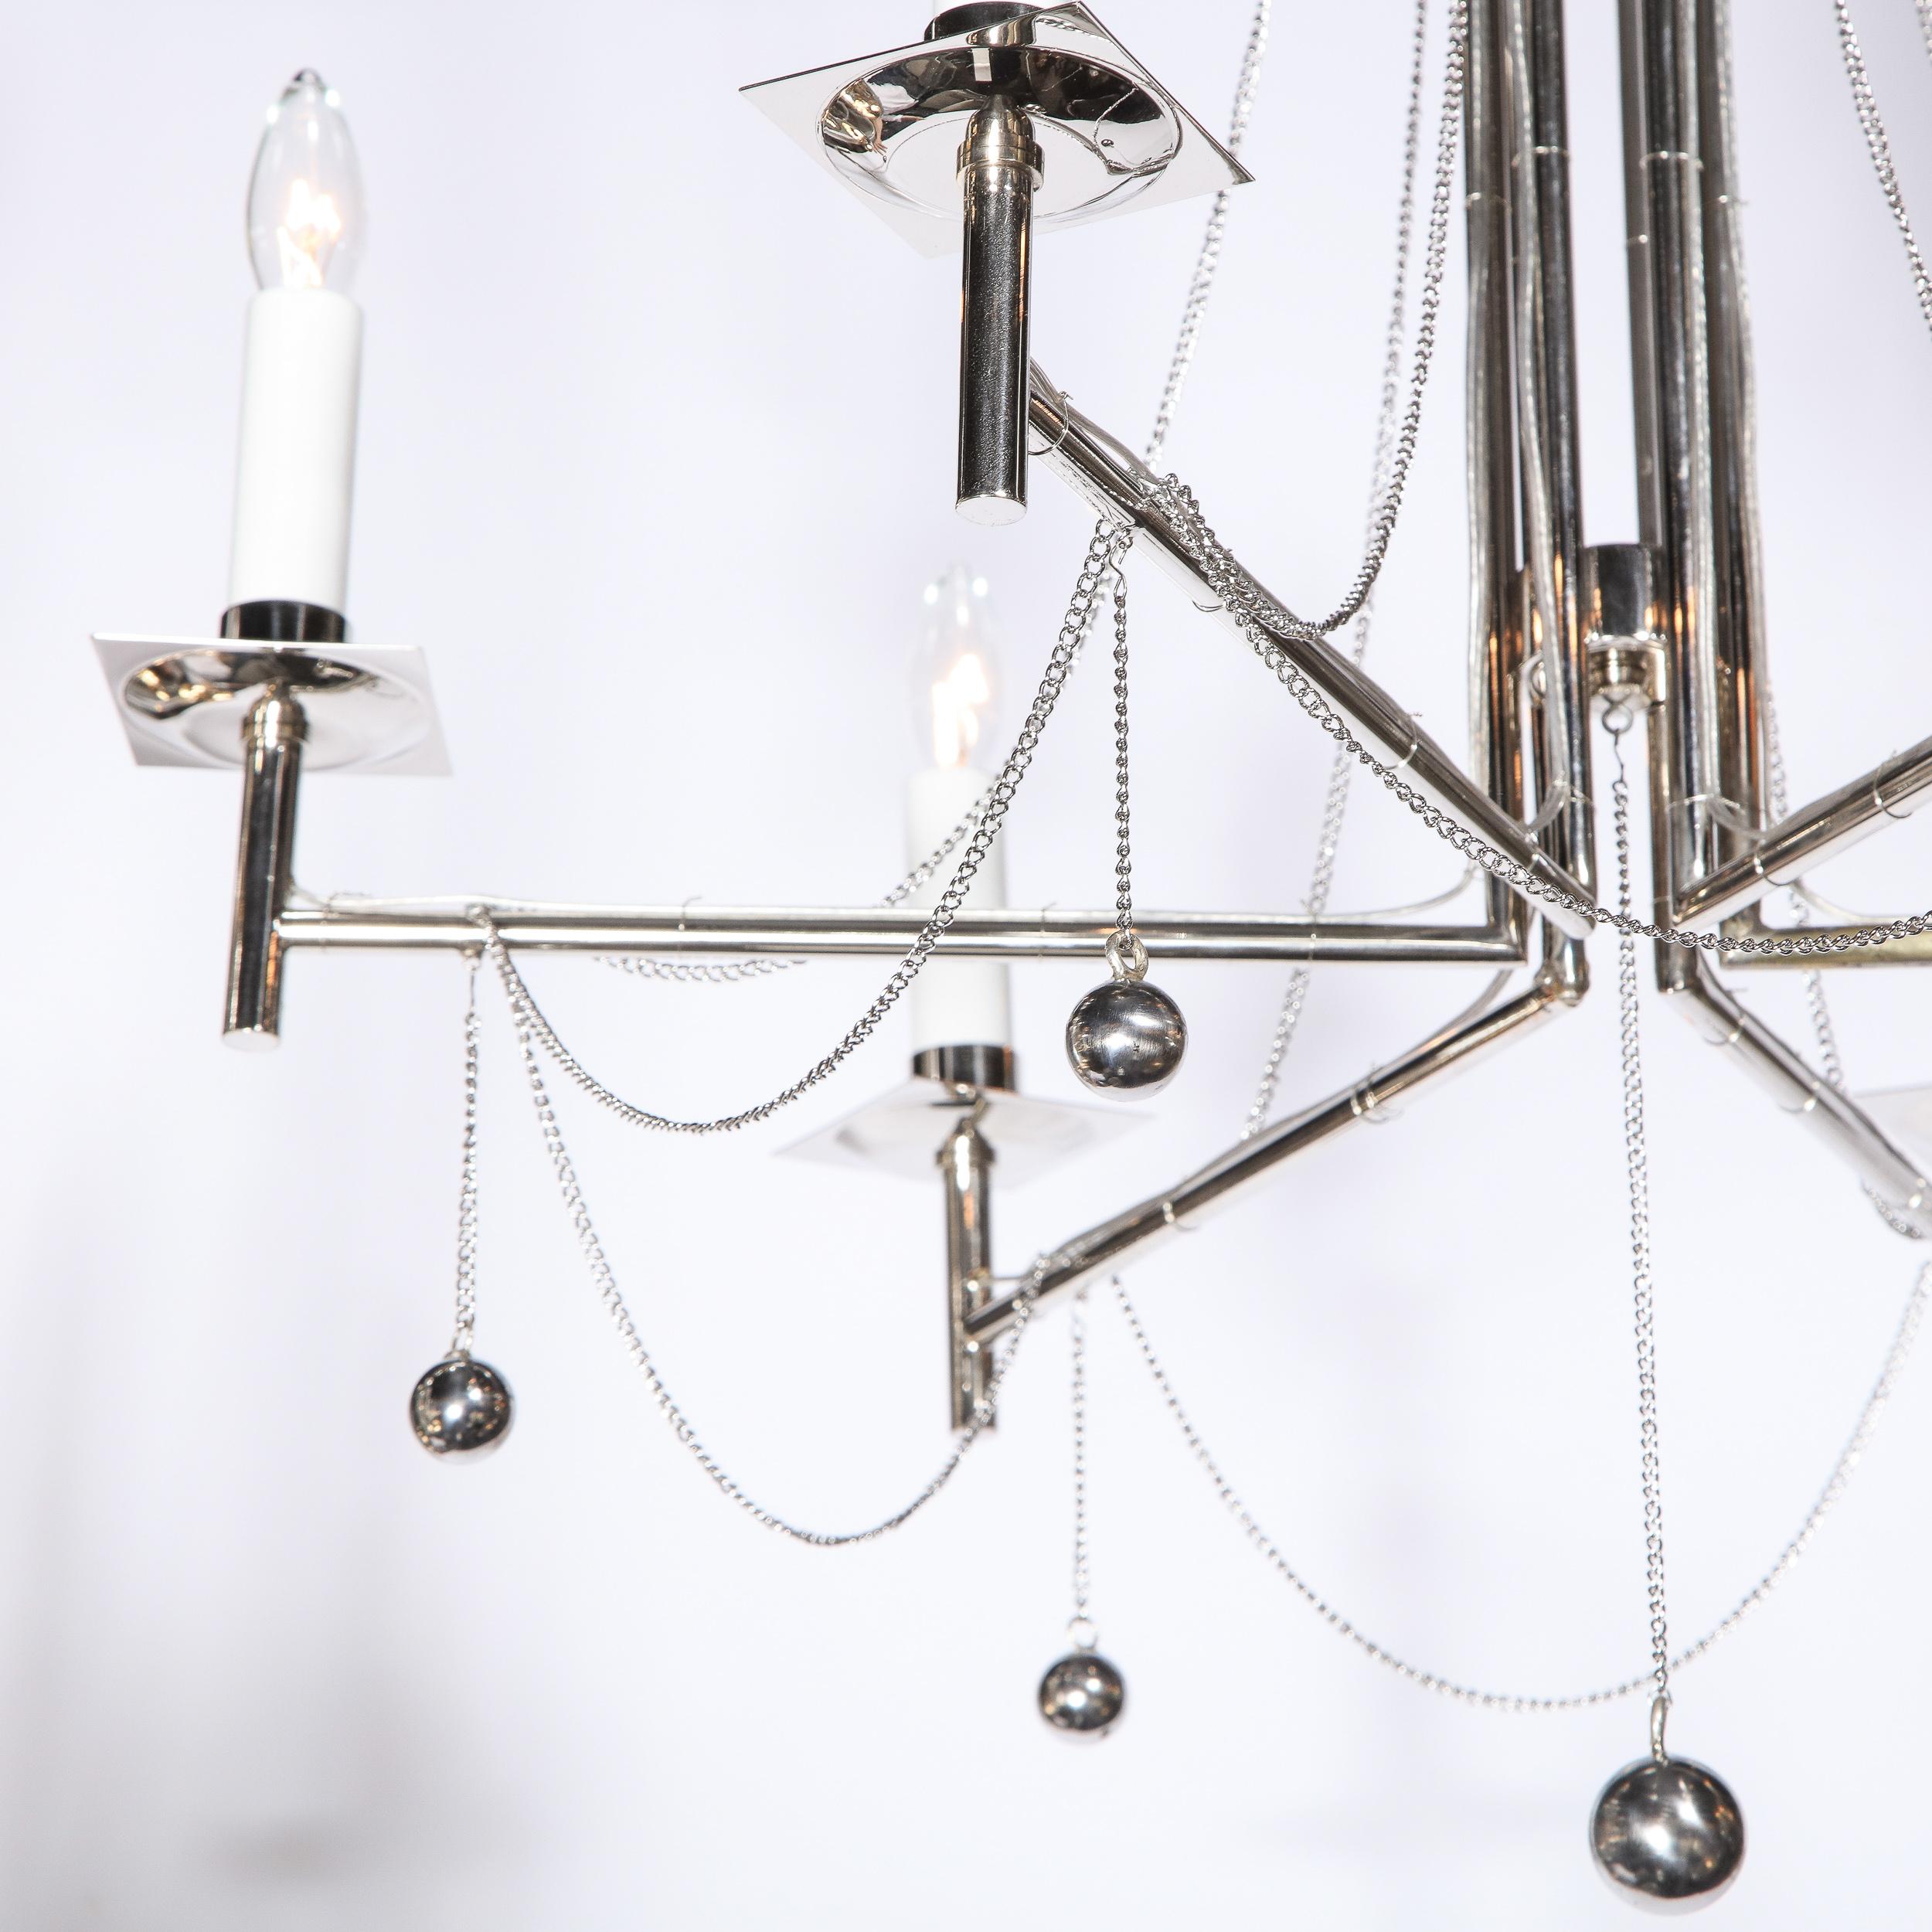 20th Century Modernist Polished Nickel Six Arm Chandelier with Chain and Spherical Details